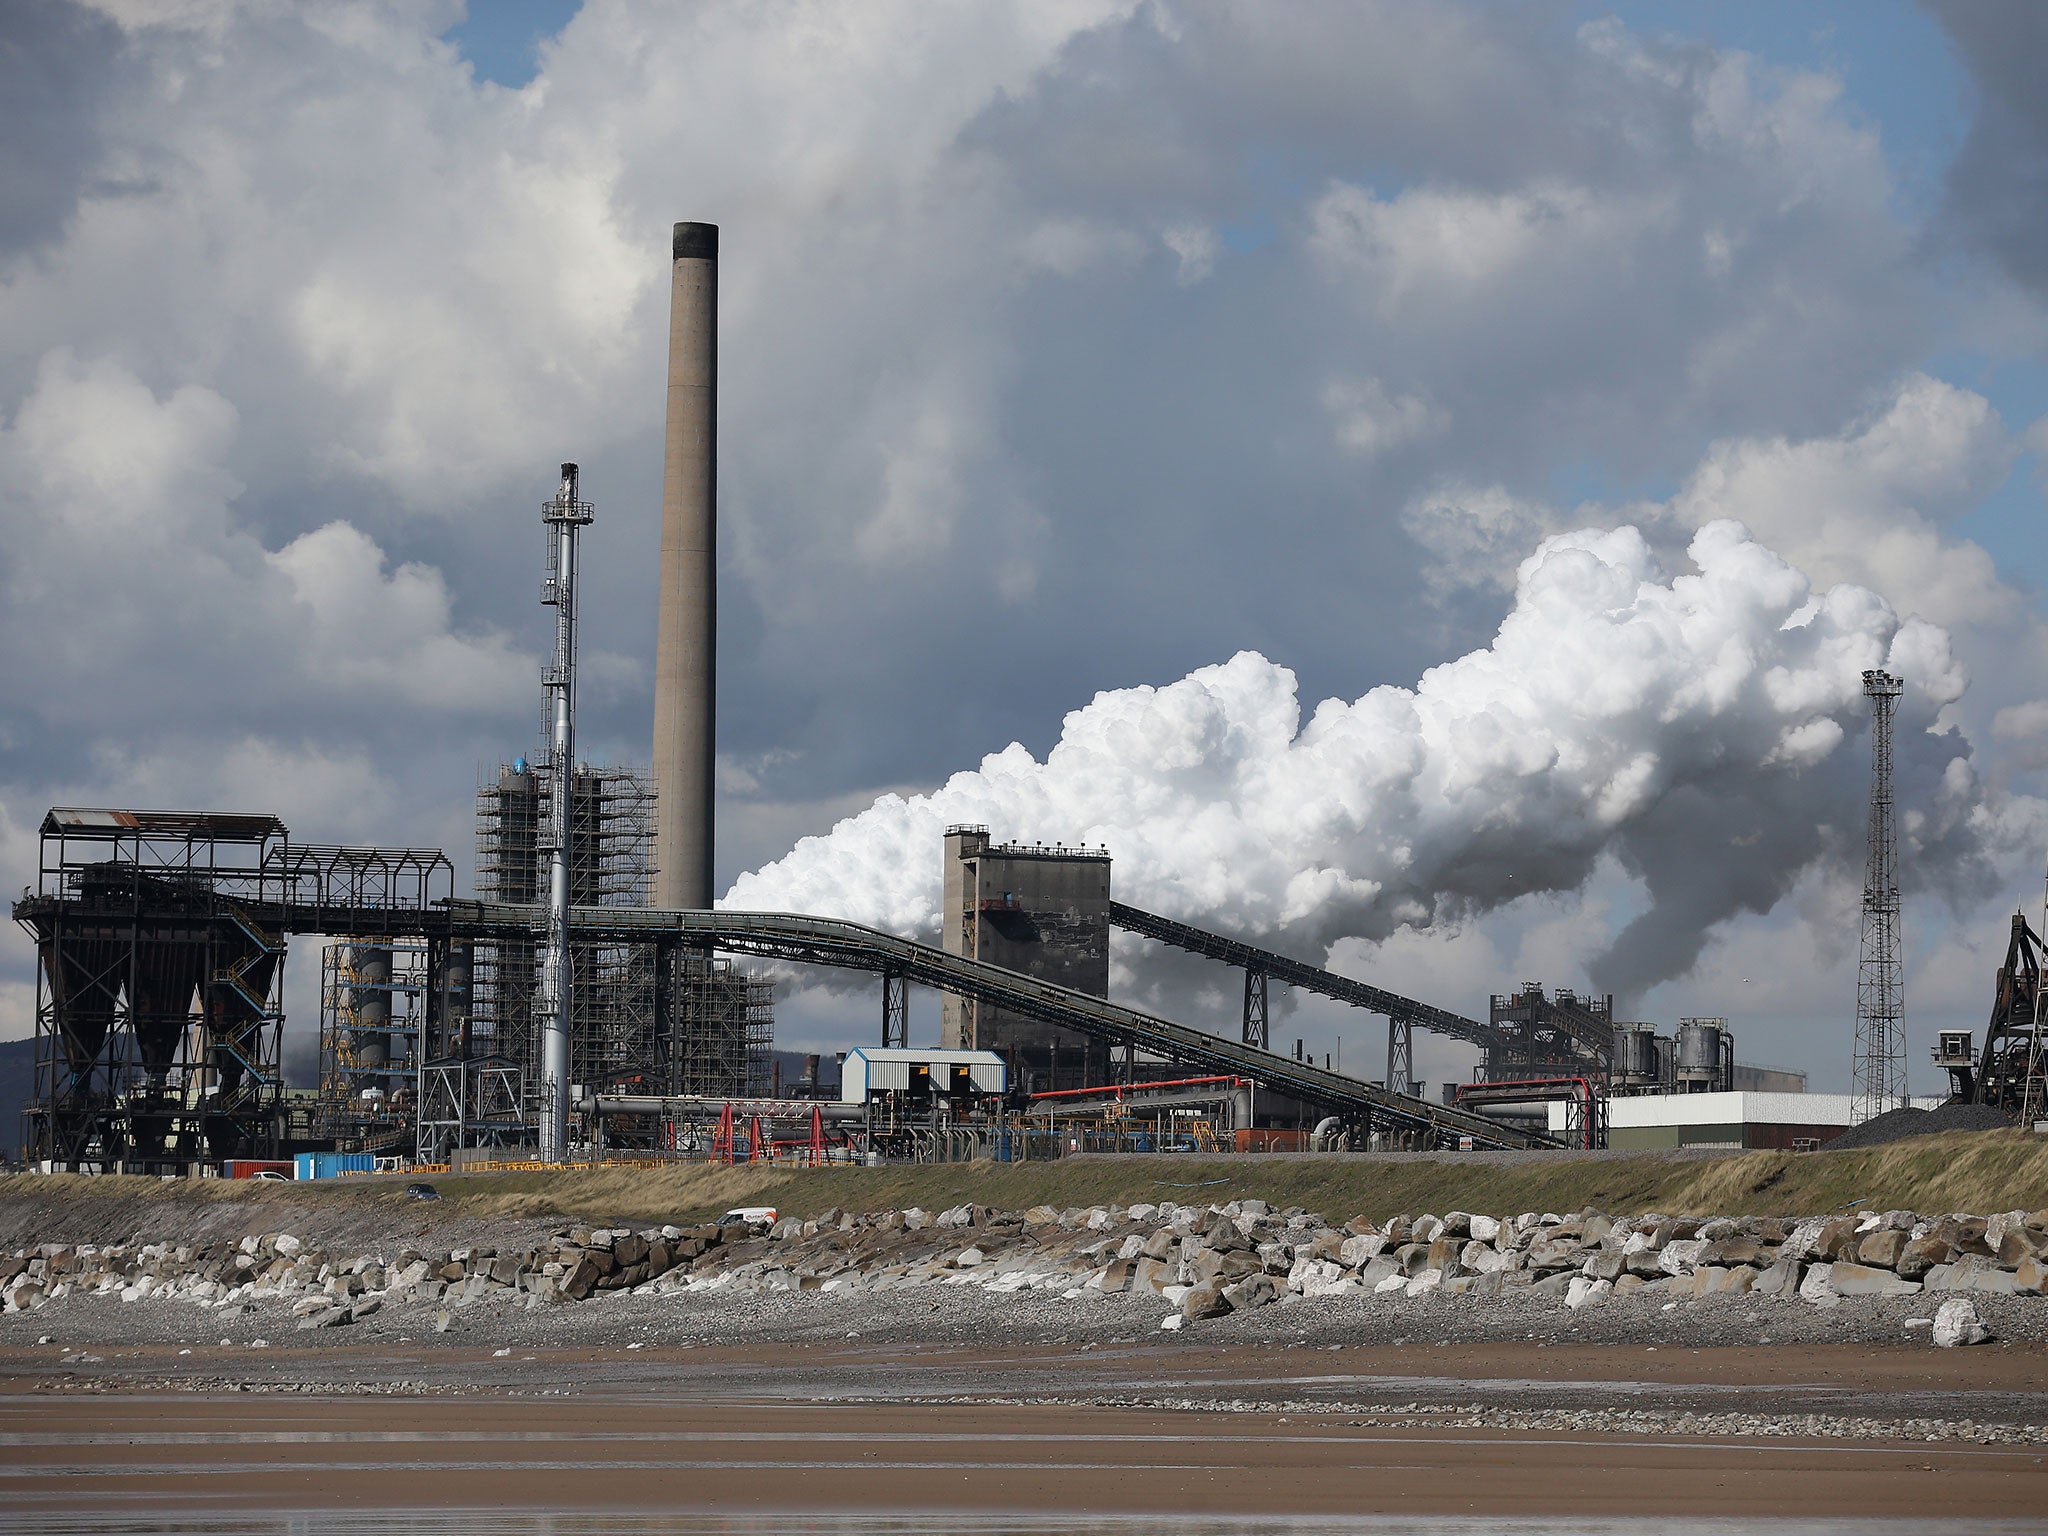 The Tata Steel plant at Port Talbot in Wales. Indian owners Tata Steel have put their British business up for sale placing thousands of jobs at risk and hitting the already floundering UK steel industry